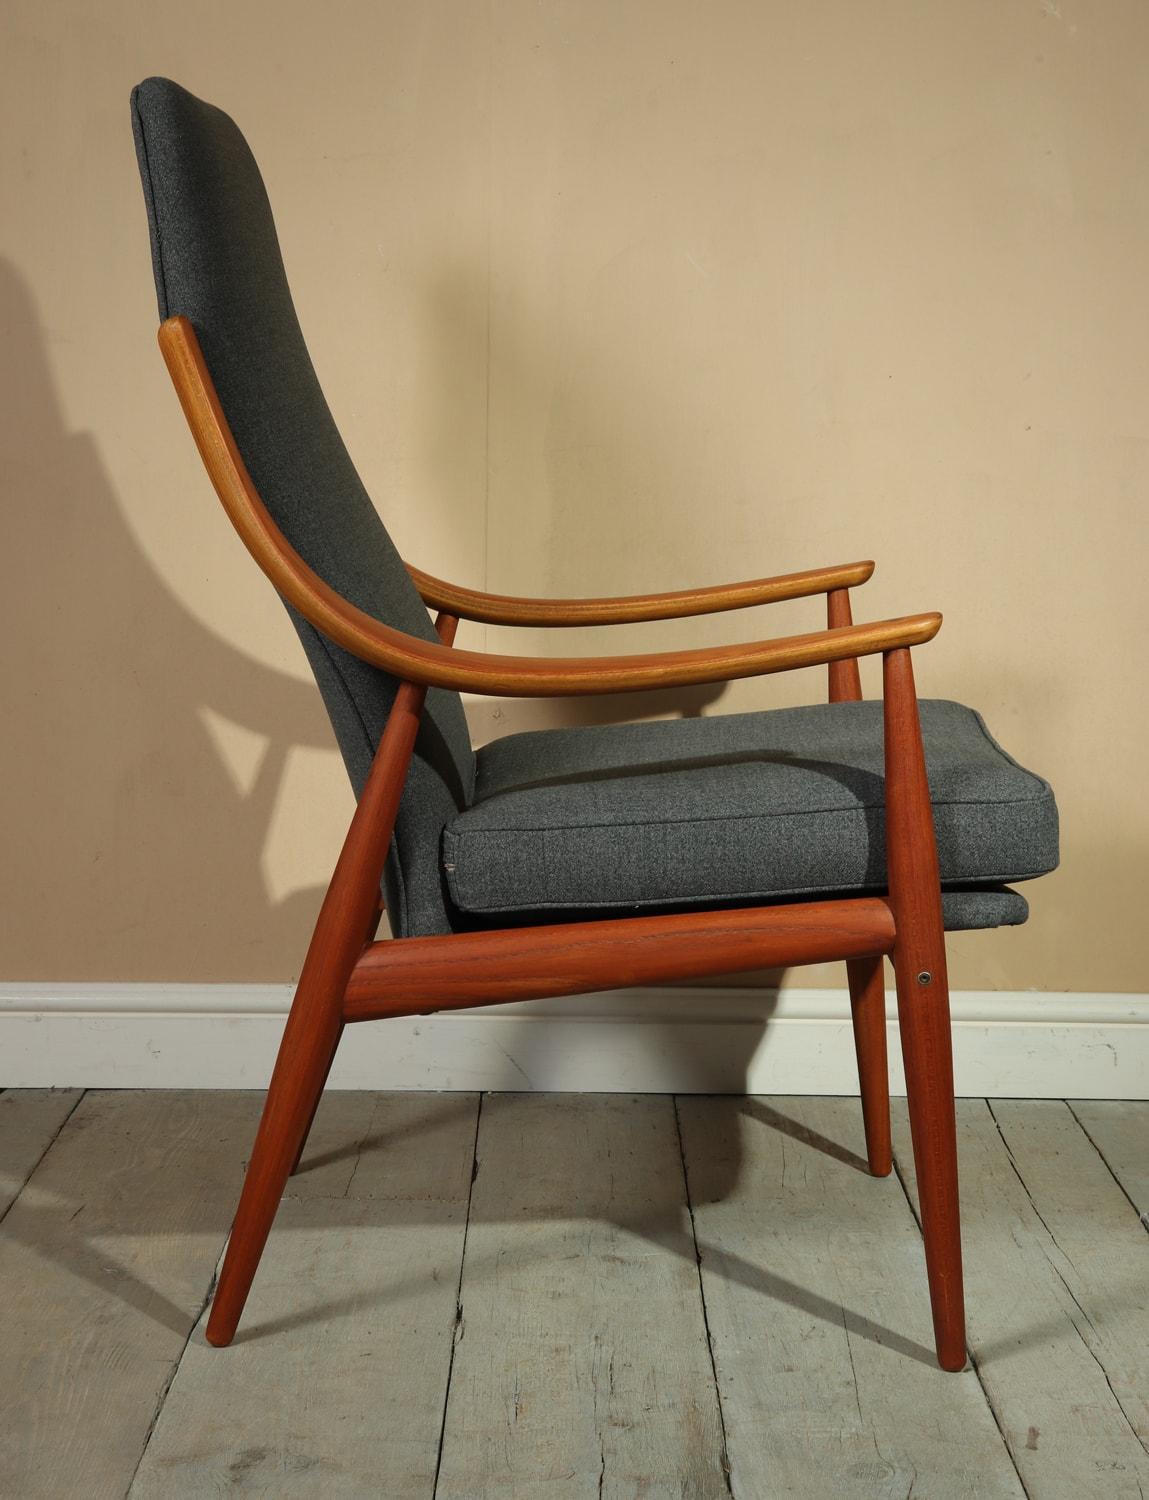 Teak chair model 148 by Peter Hvidt fo France & Son

A Peter Hvidt & Orla Mølgaard-Nielsen model 148 lounge chair designed for France & Søn in Denmark, circa 1960s. This design uses quality teak and a few skilled techniques including laminated